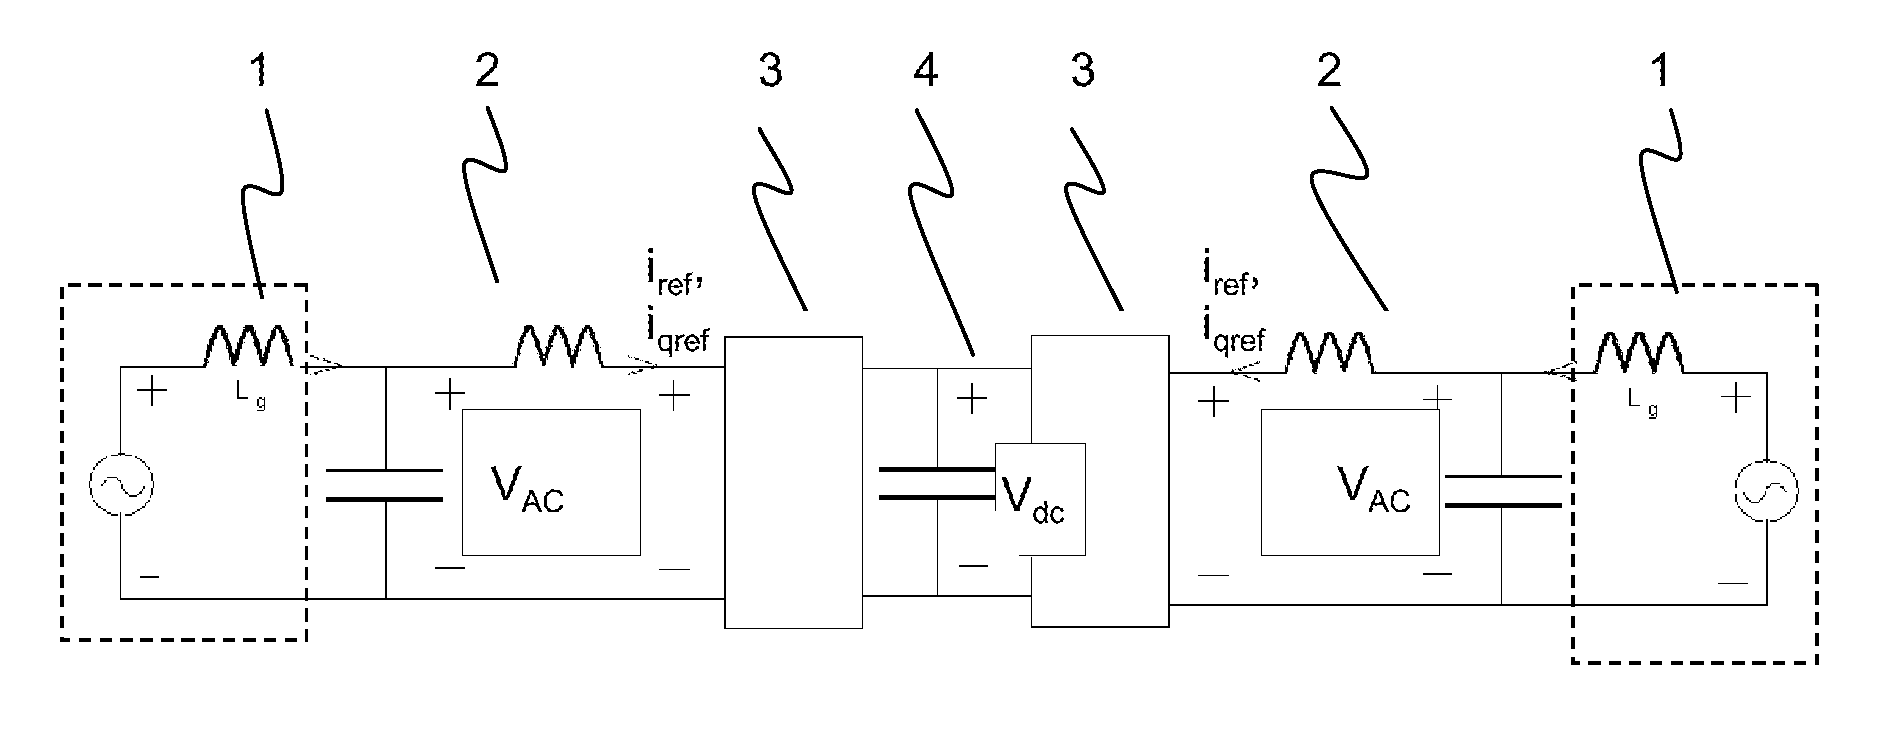 Controlling a high-voltage direct-current (HVDC) link